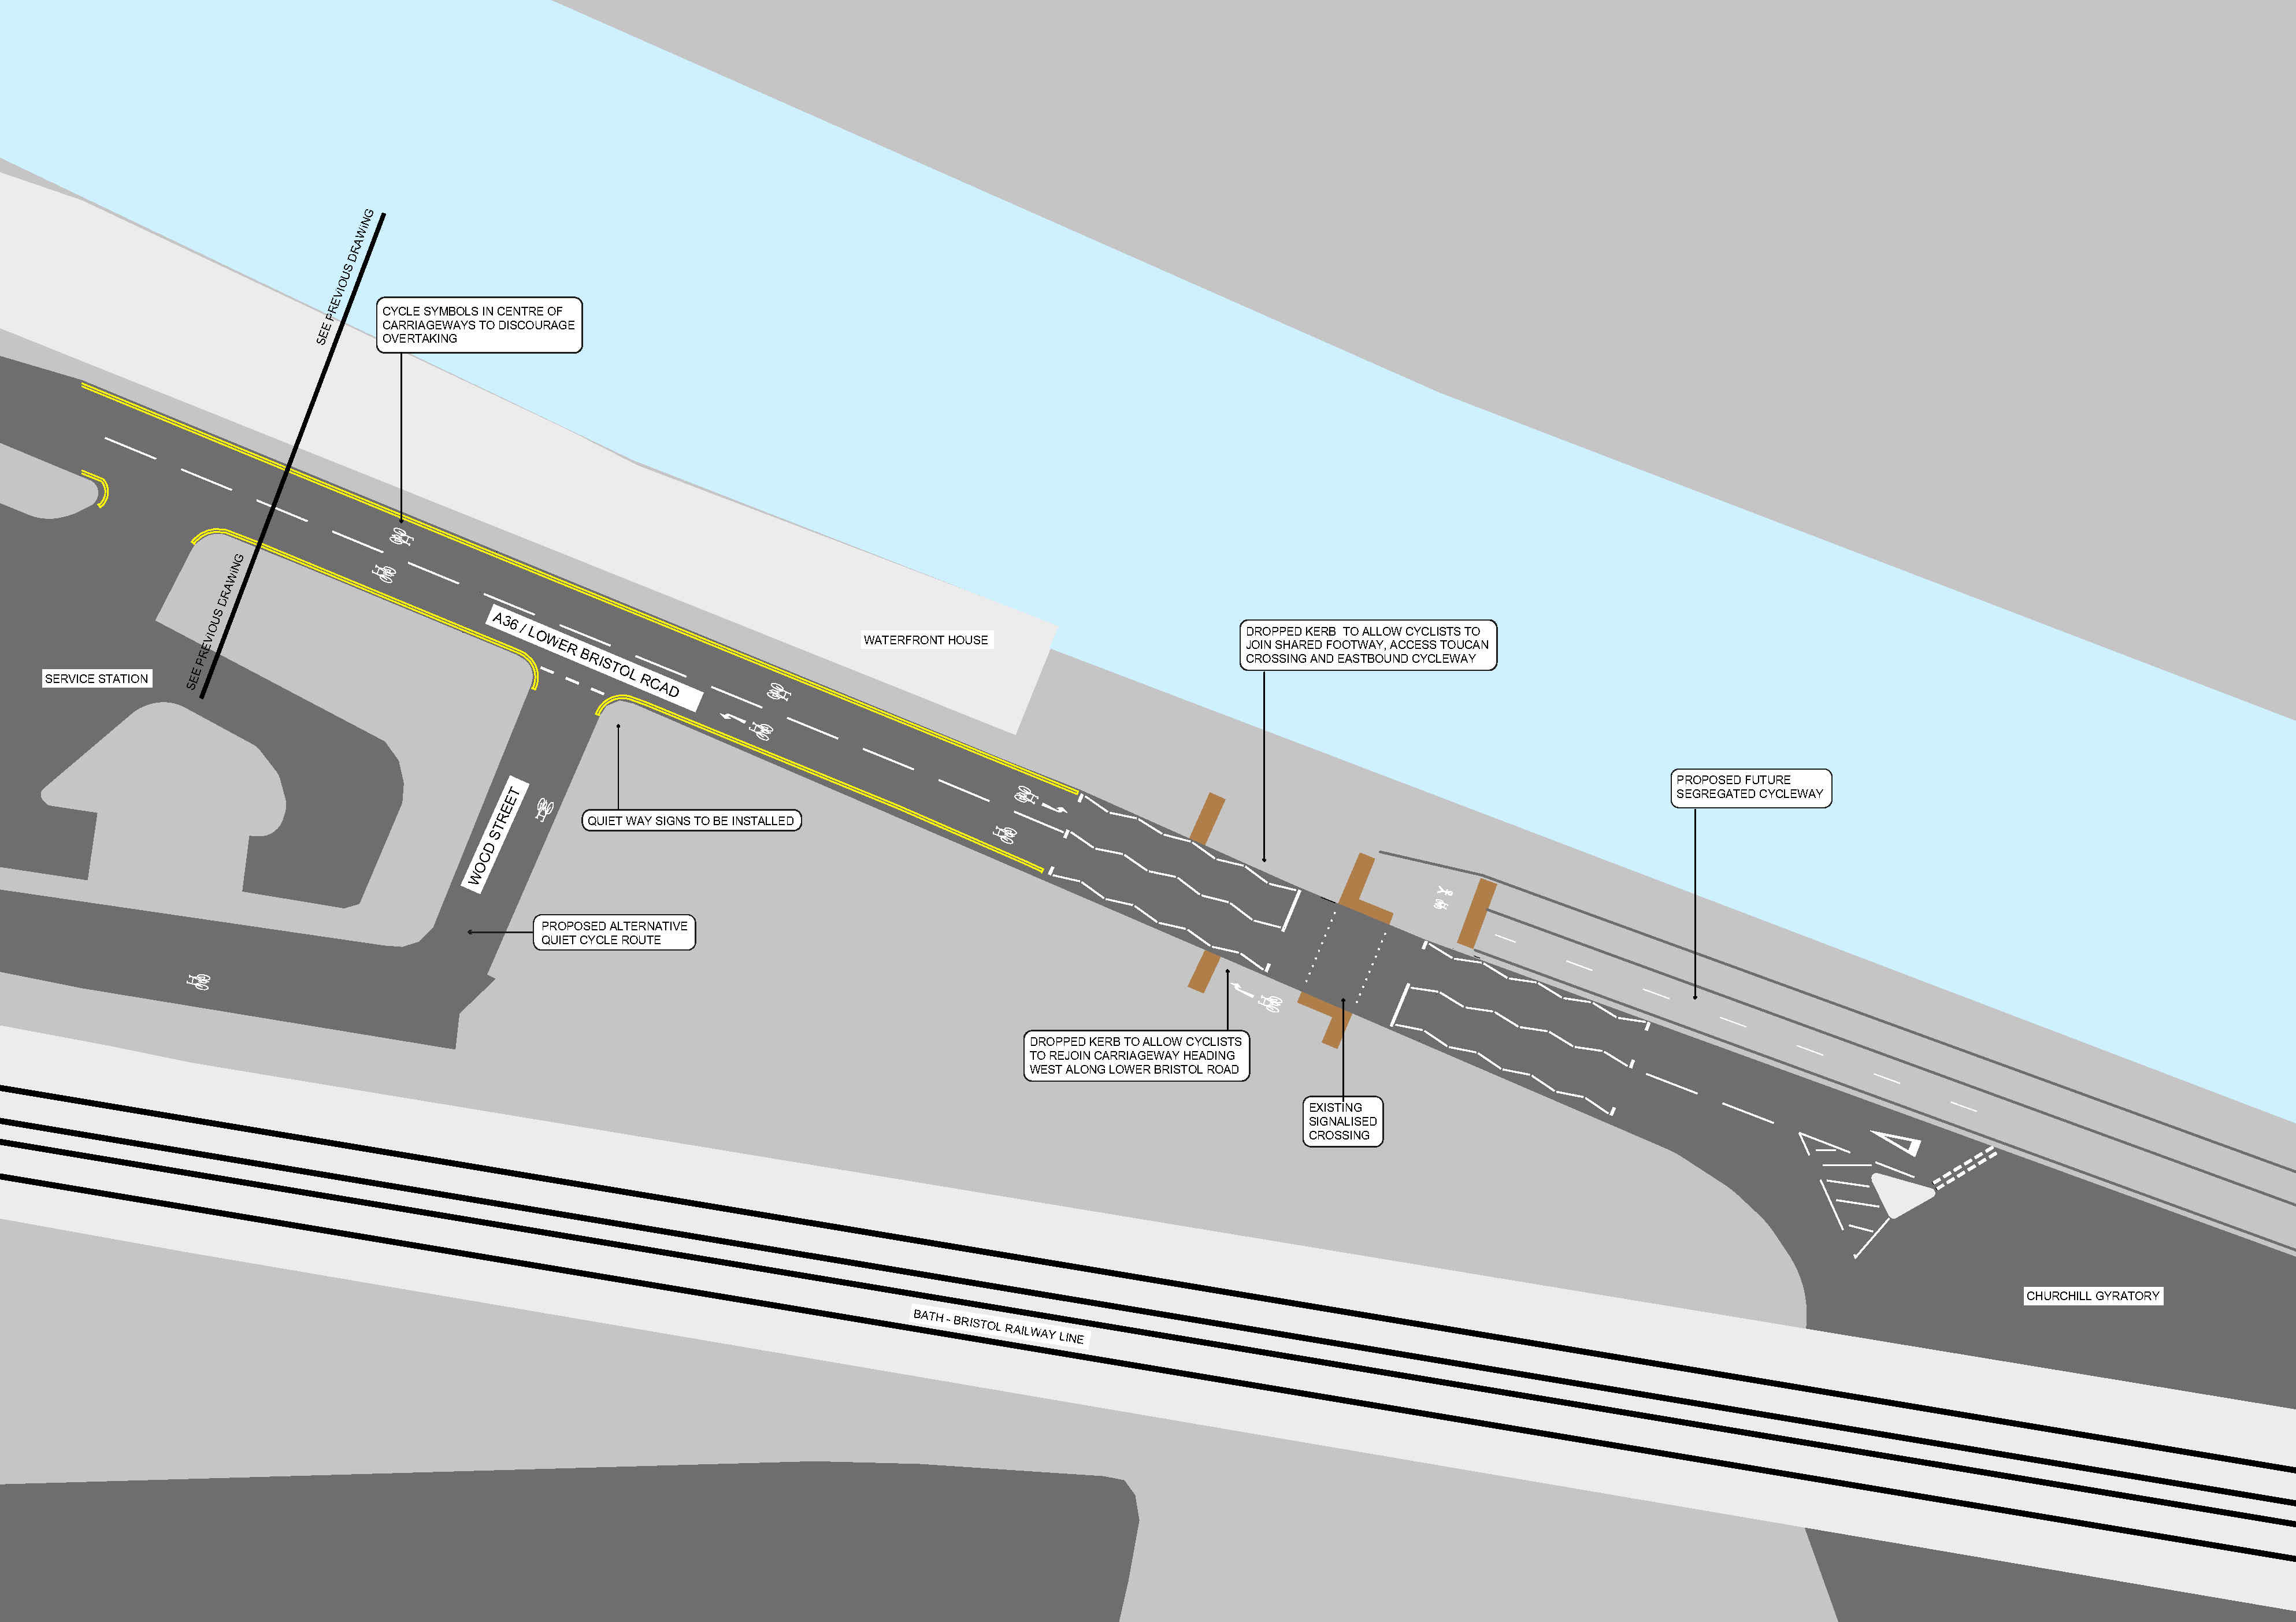 Map of section 4 of the proposed improvements to Lower Bristol Road as part of the Bath Quays Links project.